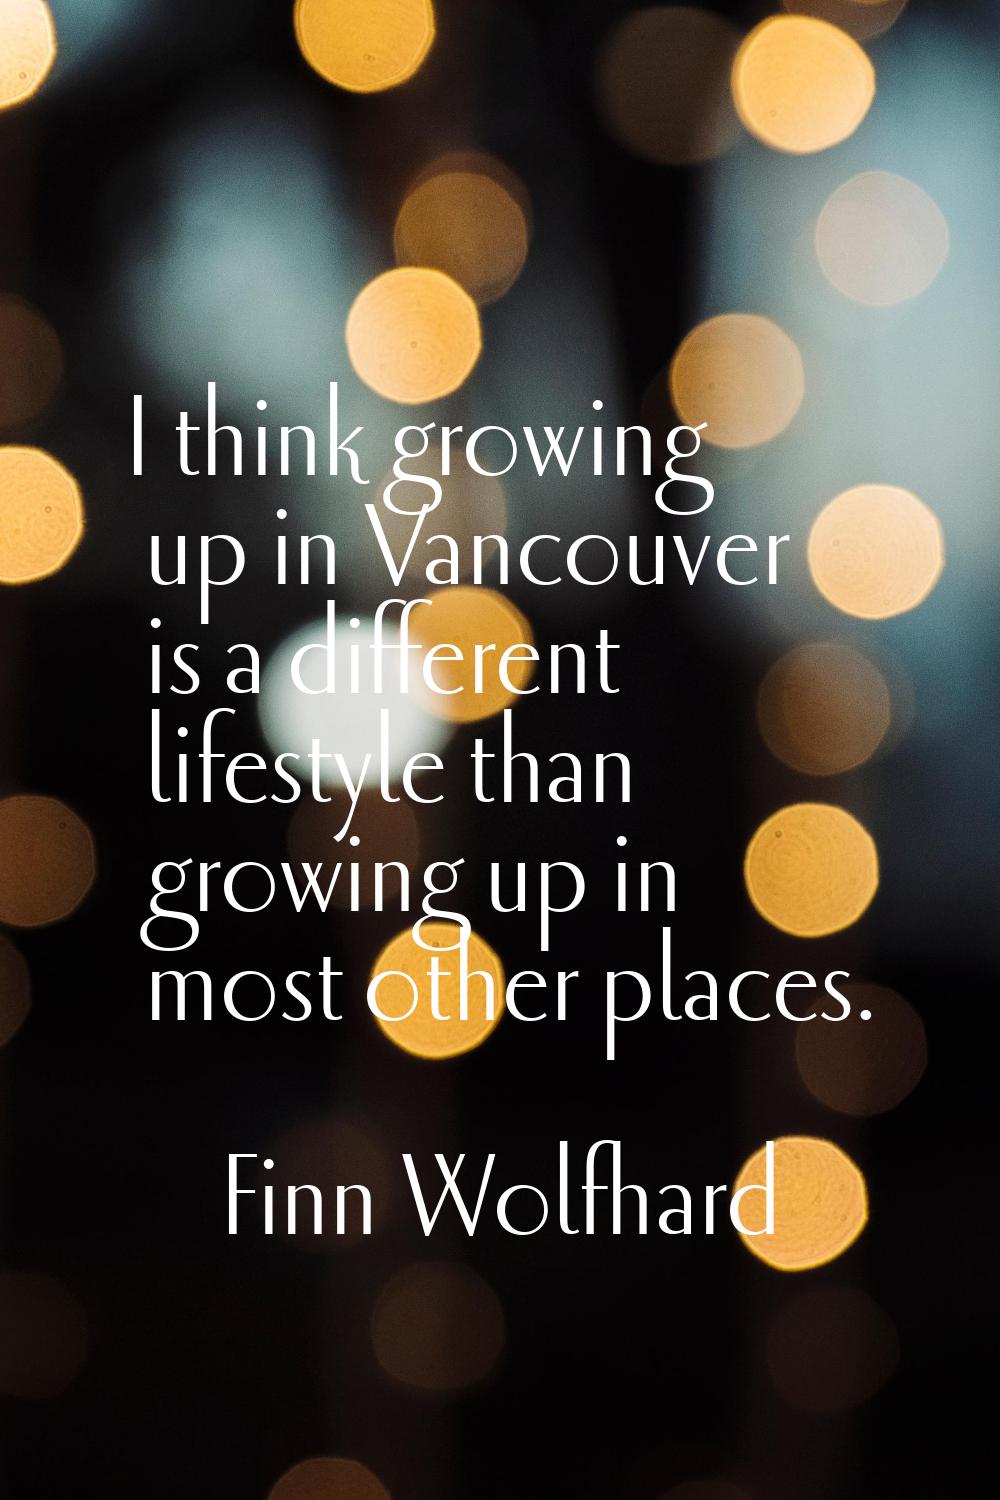 I think growing up in Vancouver is a different lifestyle than growing up in most other places.